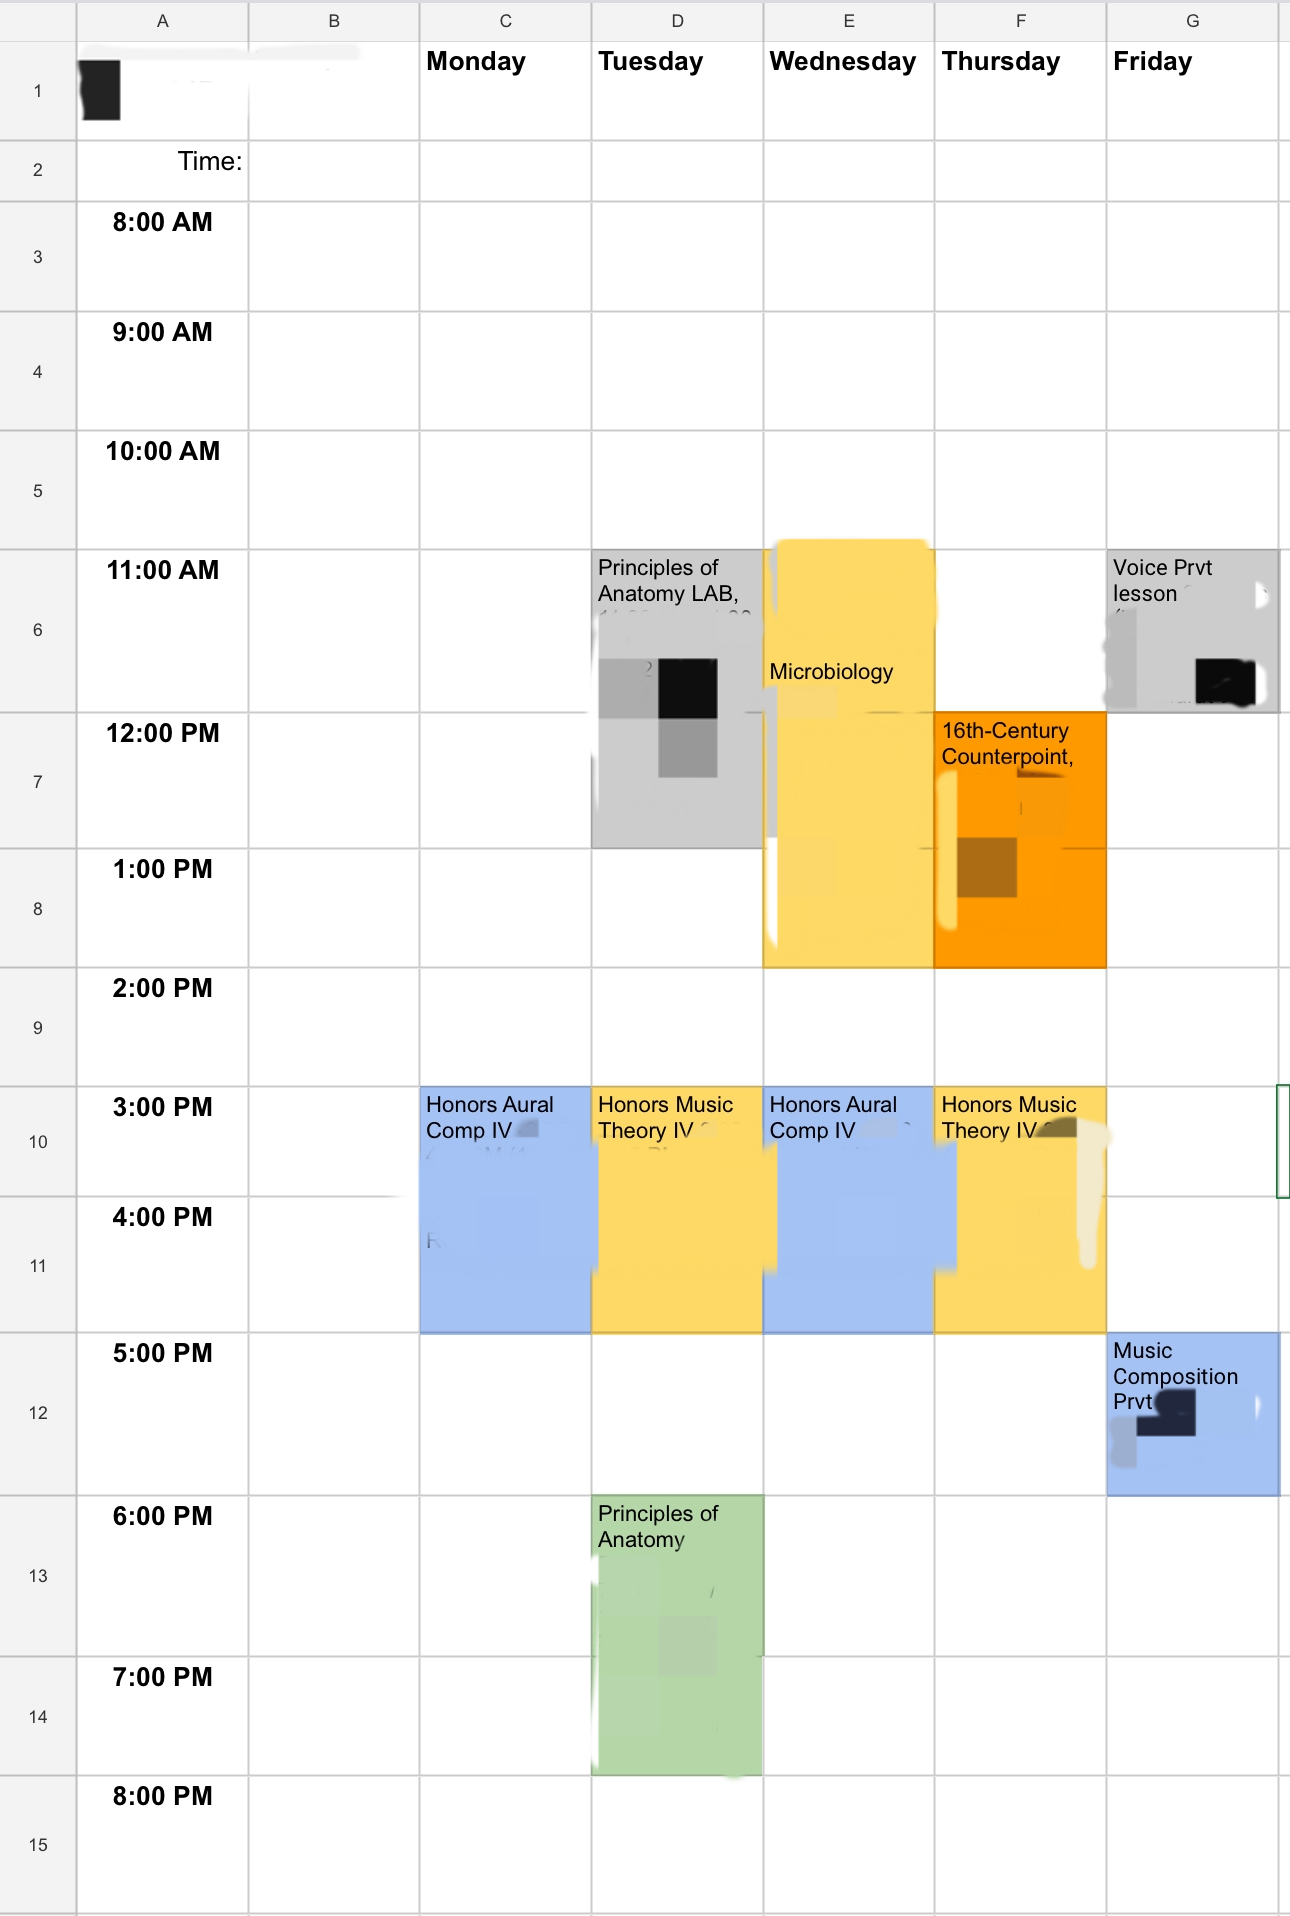 An excel sheet calendar of a nontraditional premed student’s schedule.